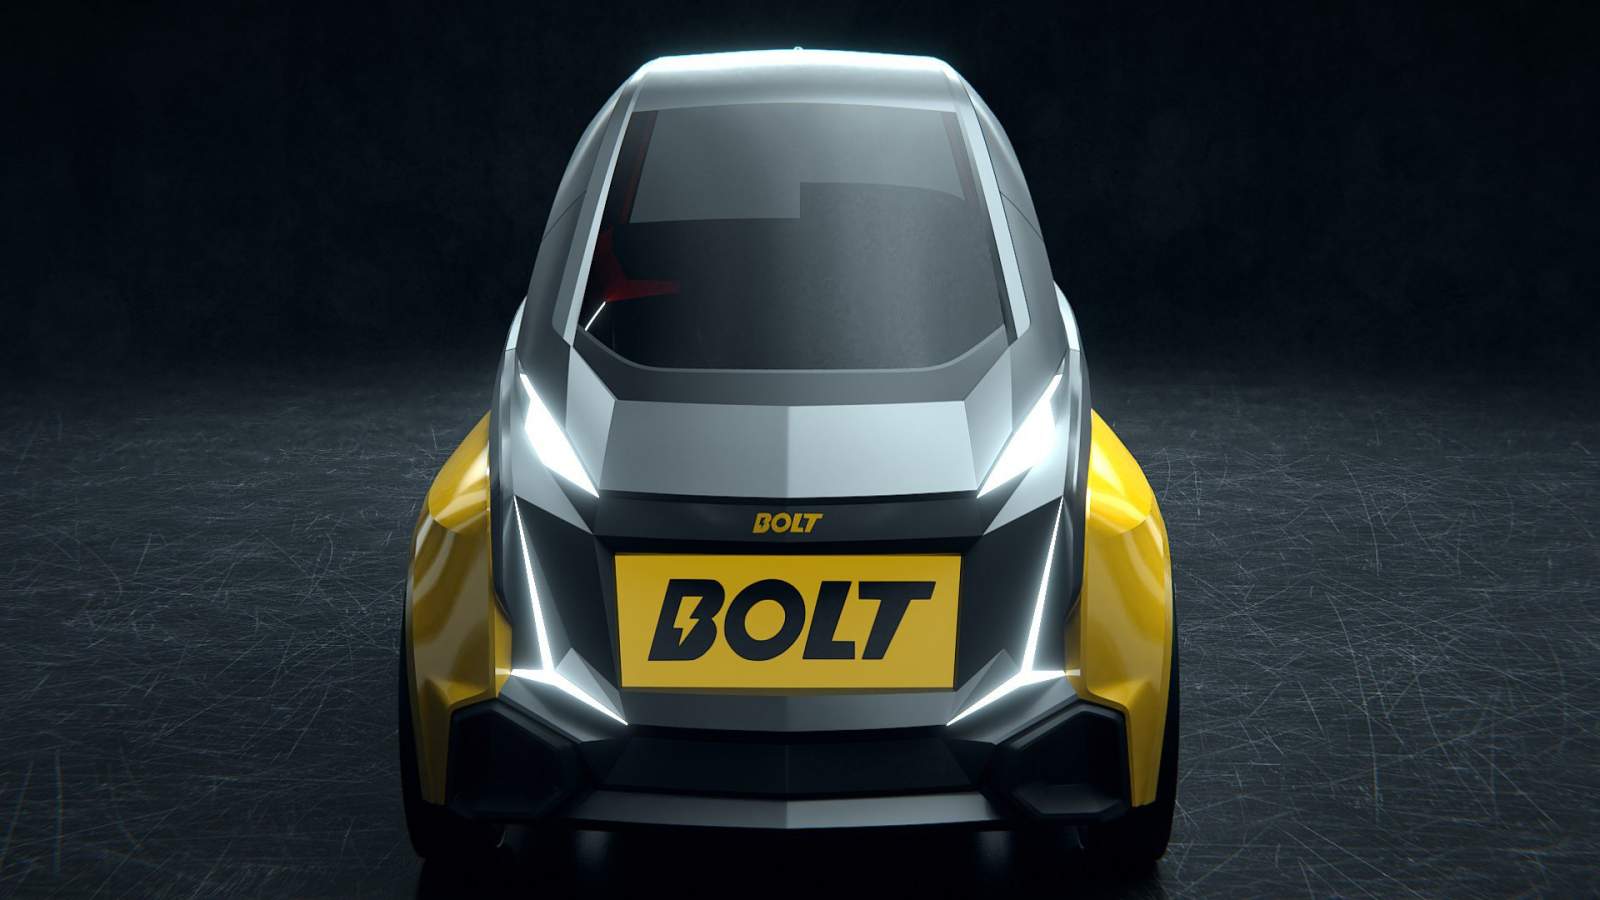 Usain Bolt launches a twoseater electric vehicle